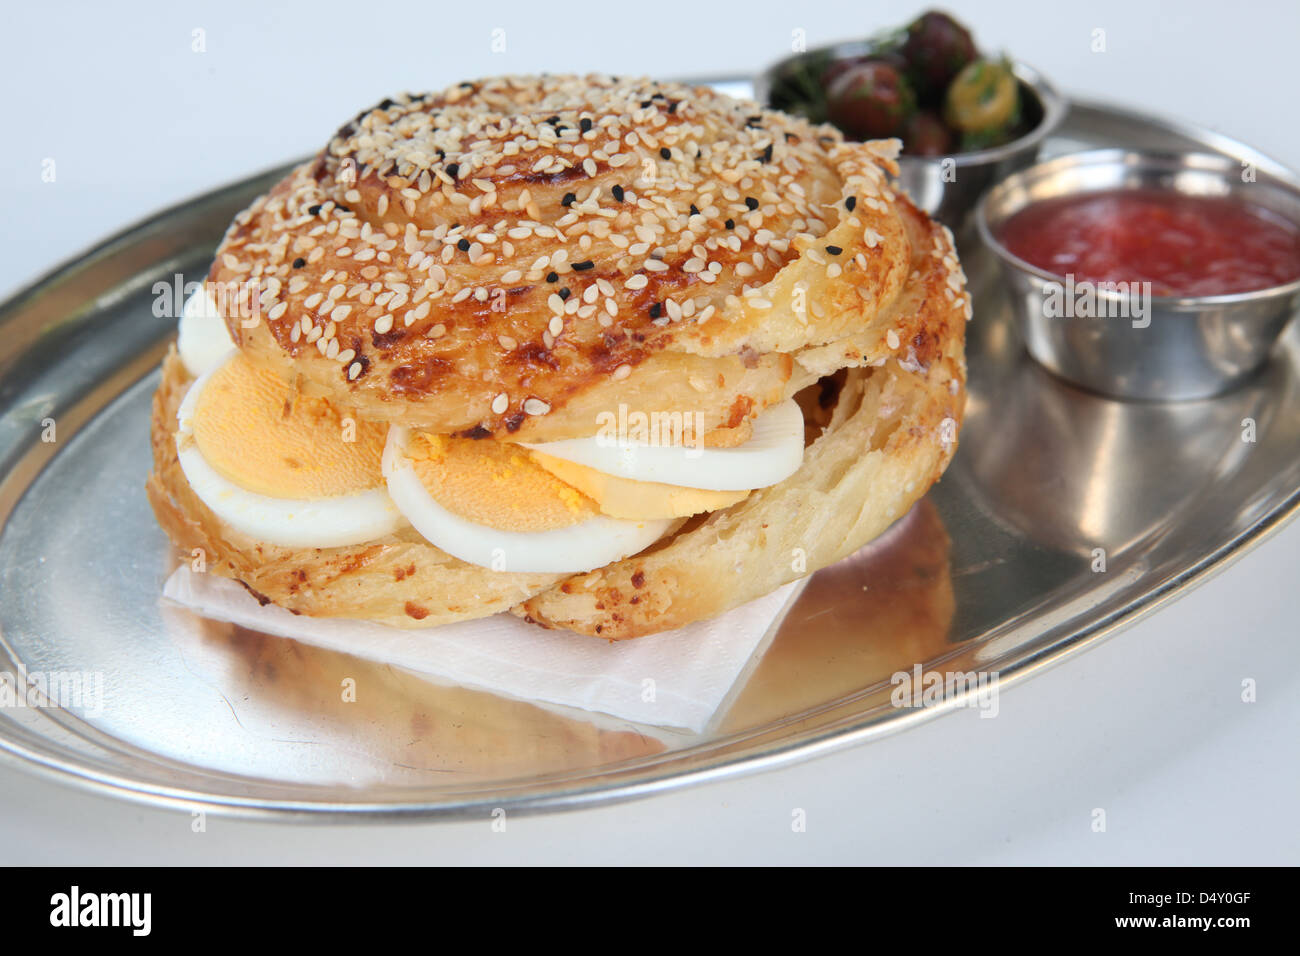 Borek (Also Burek) a Turkish pastry filled with cheese or potato or mushroom with hard boiled egg Stock Photo